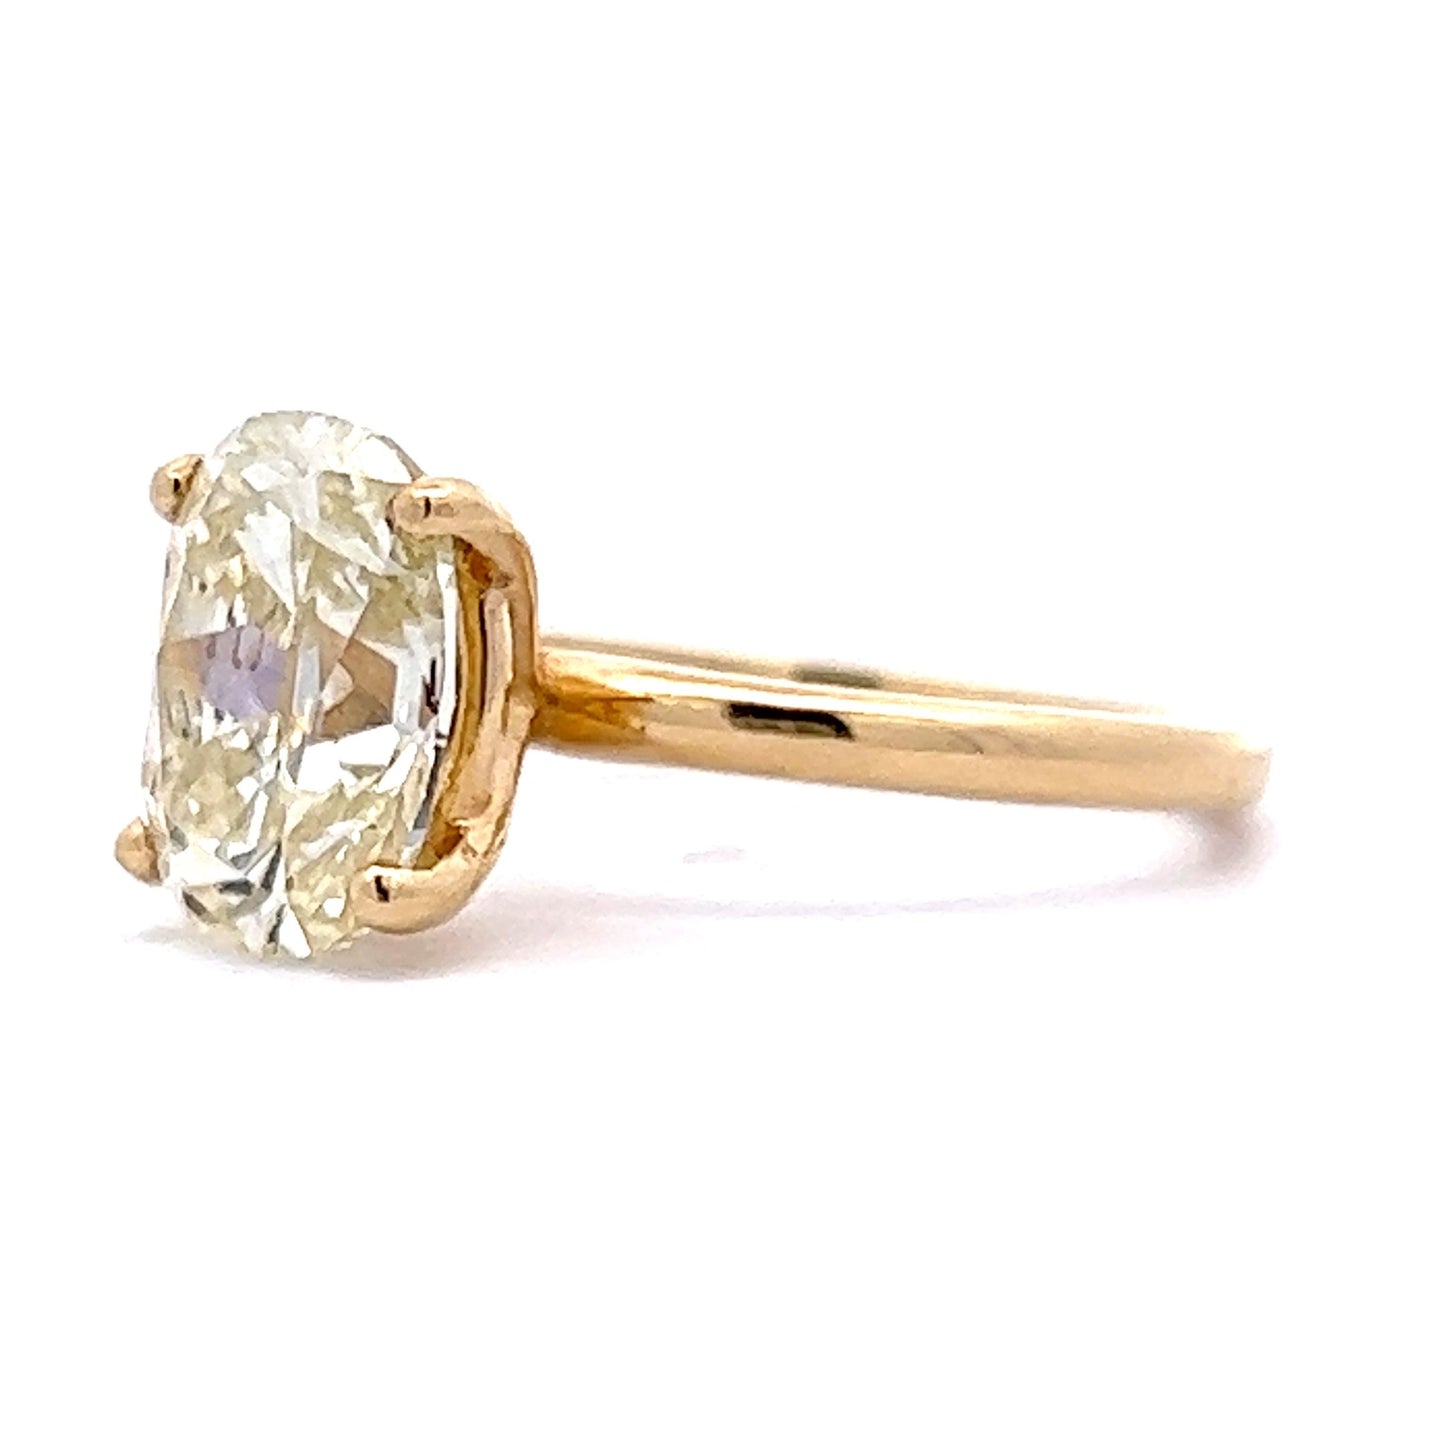 4 Carat Oval Cut Diamond Engagement Ring in 14k Yellow Gold